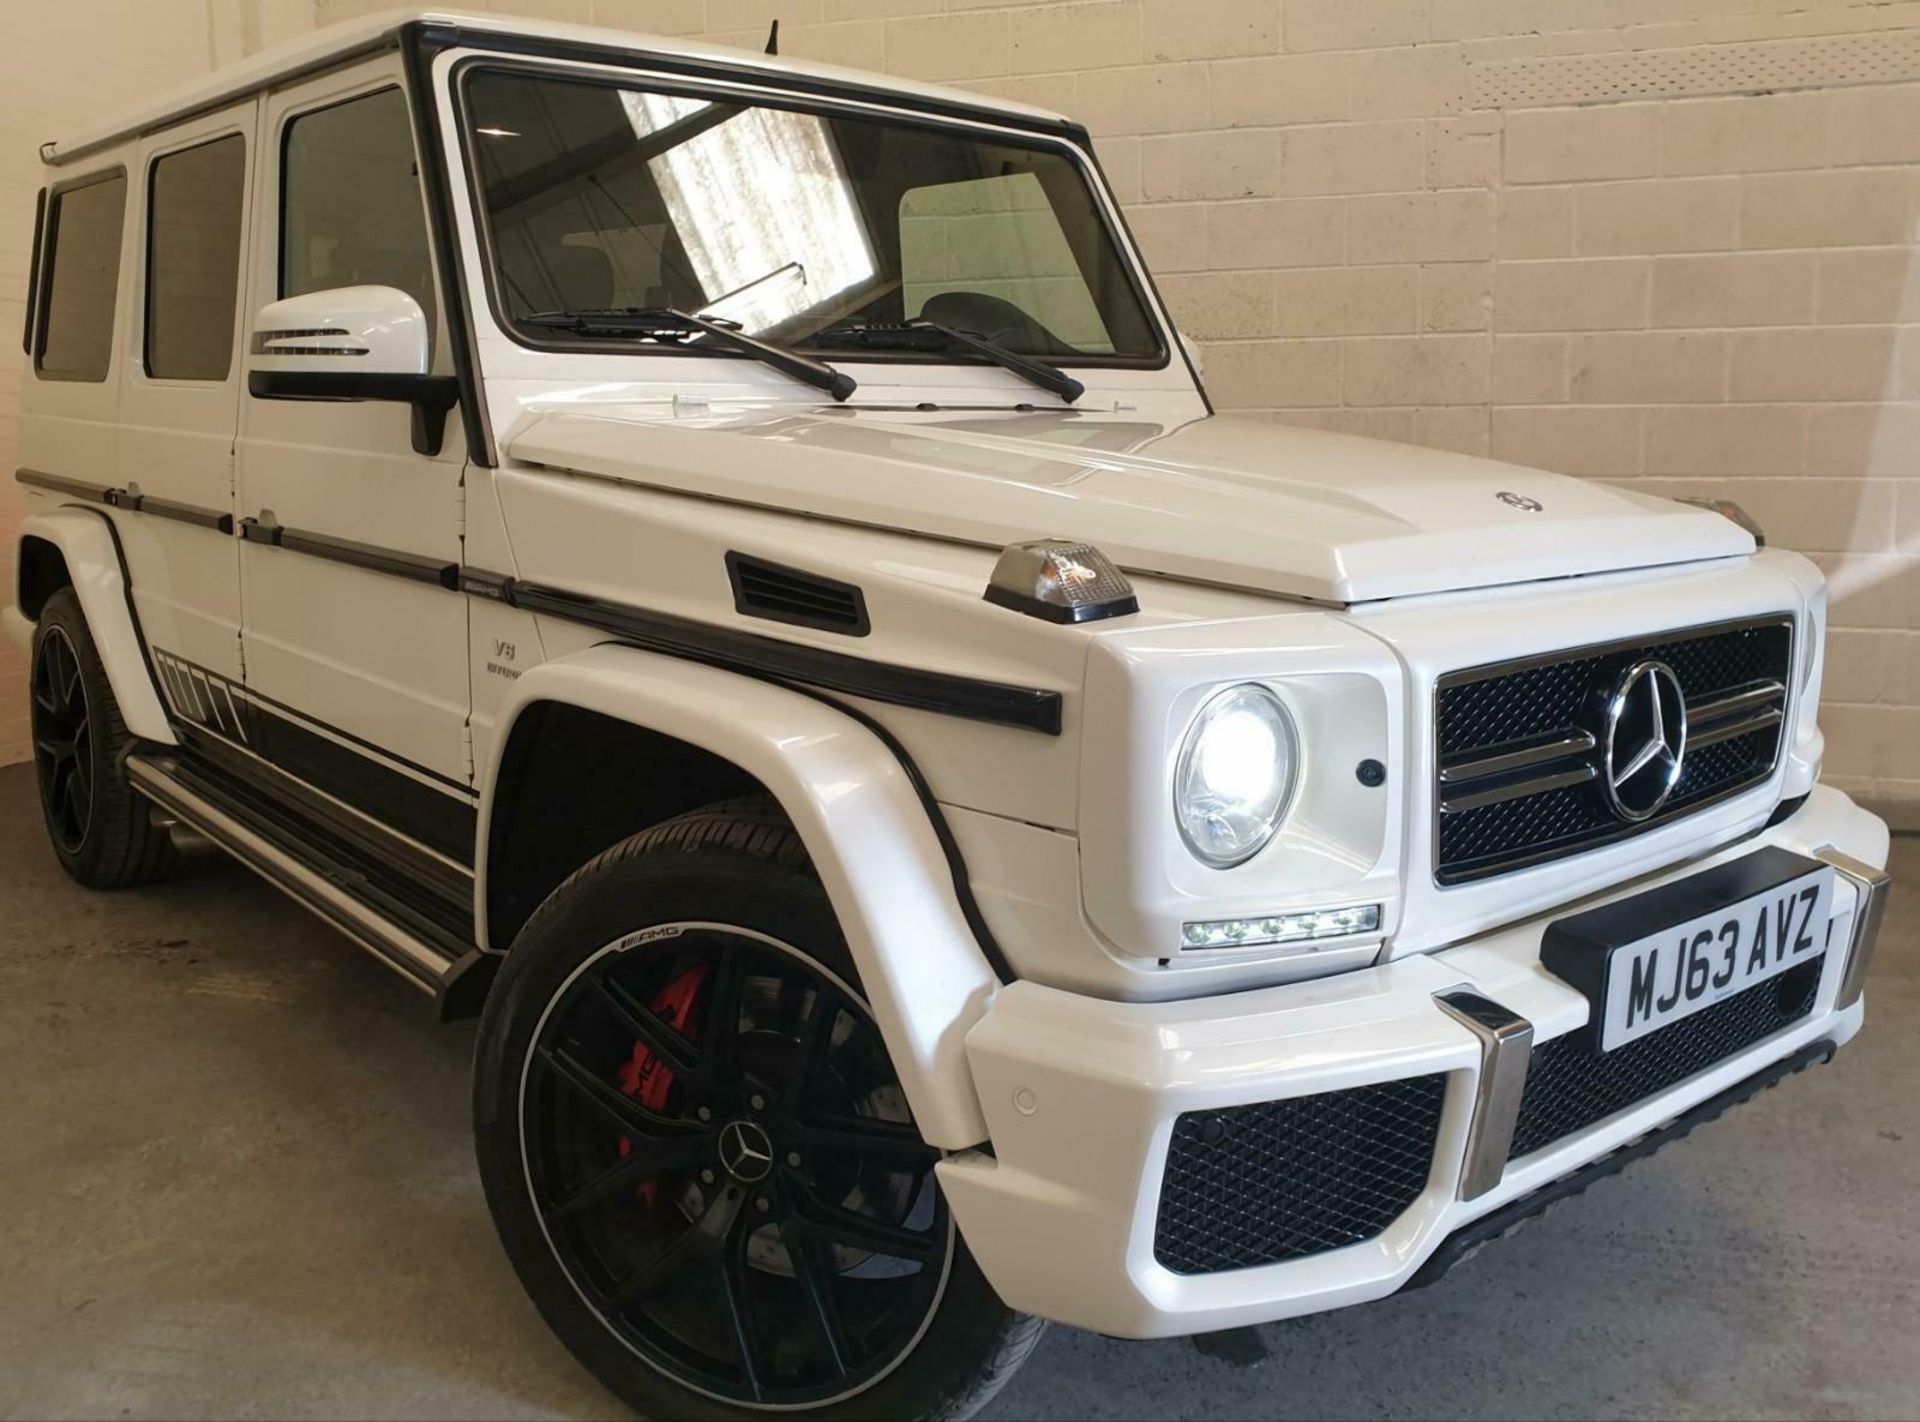 2014/63 REG MERCEDES-BENZ G63 AMG 5.5L AUTOMATIC, SHOWING 0 FORMER KEEPERS *NO VAT* - Image 2 of 12